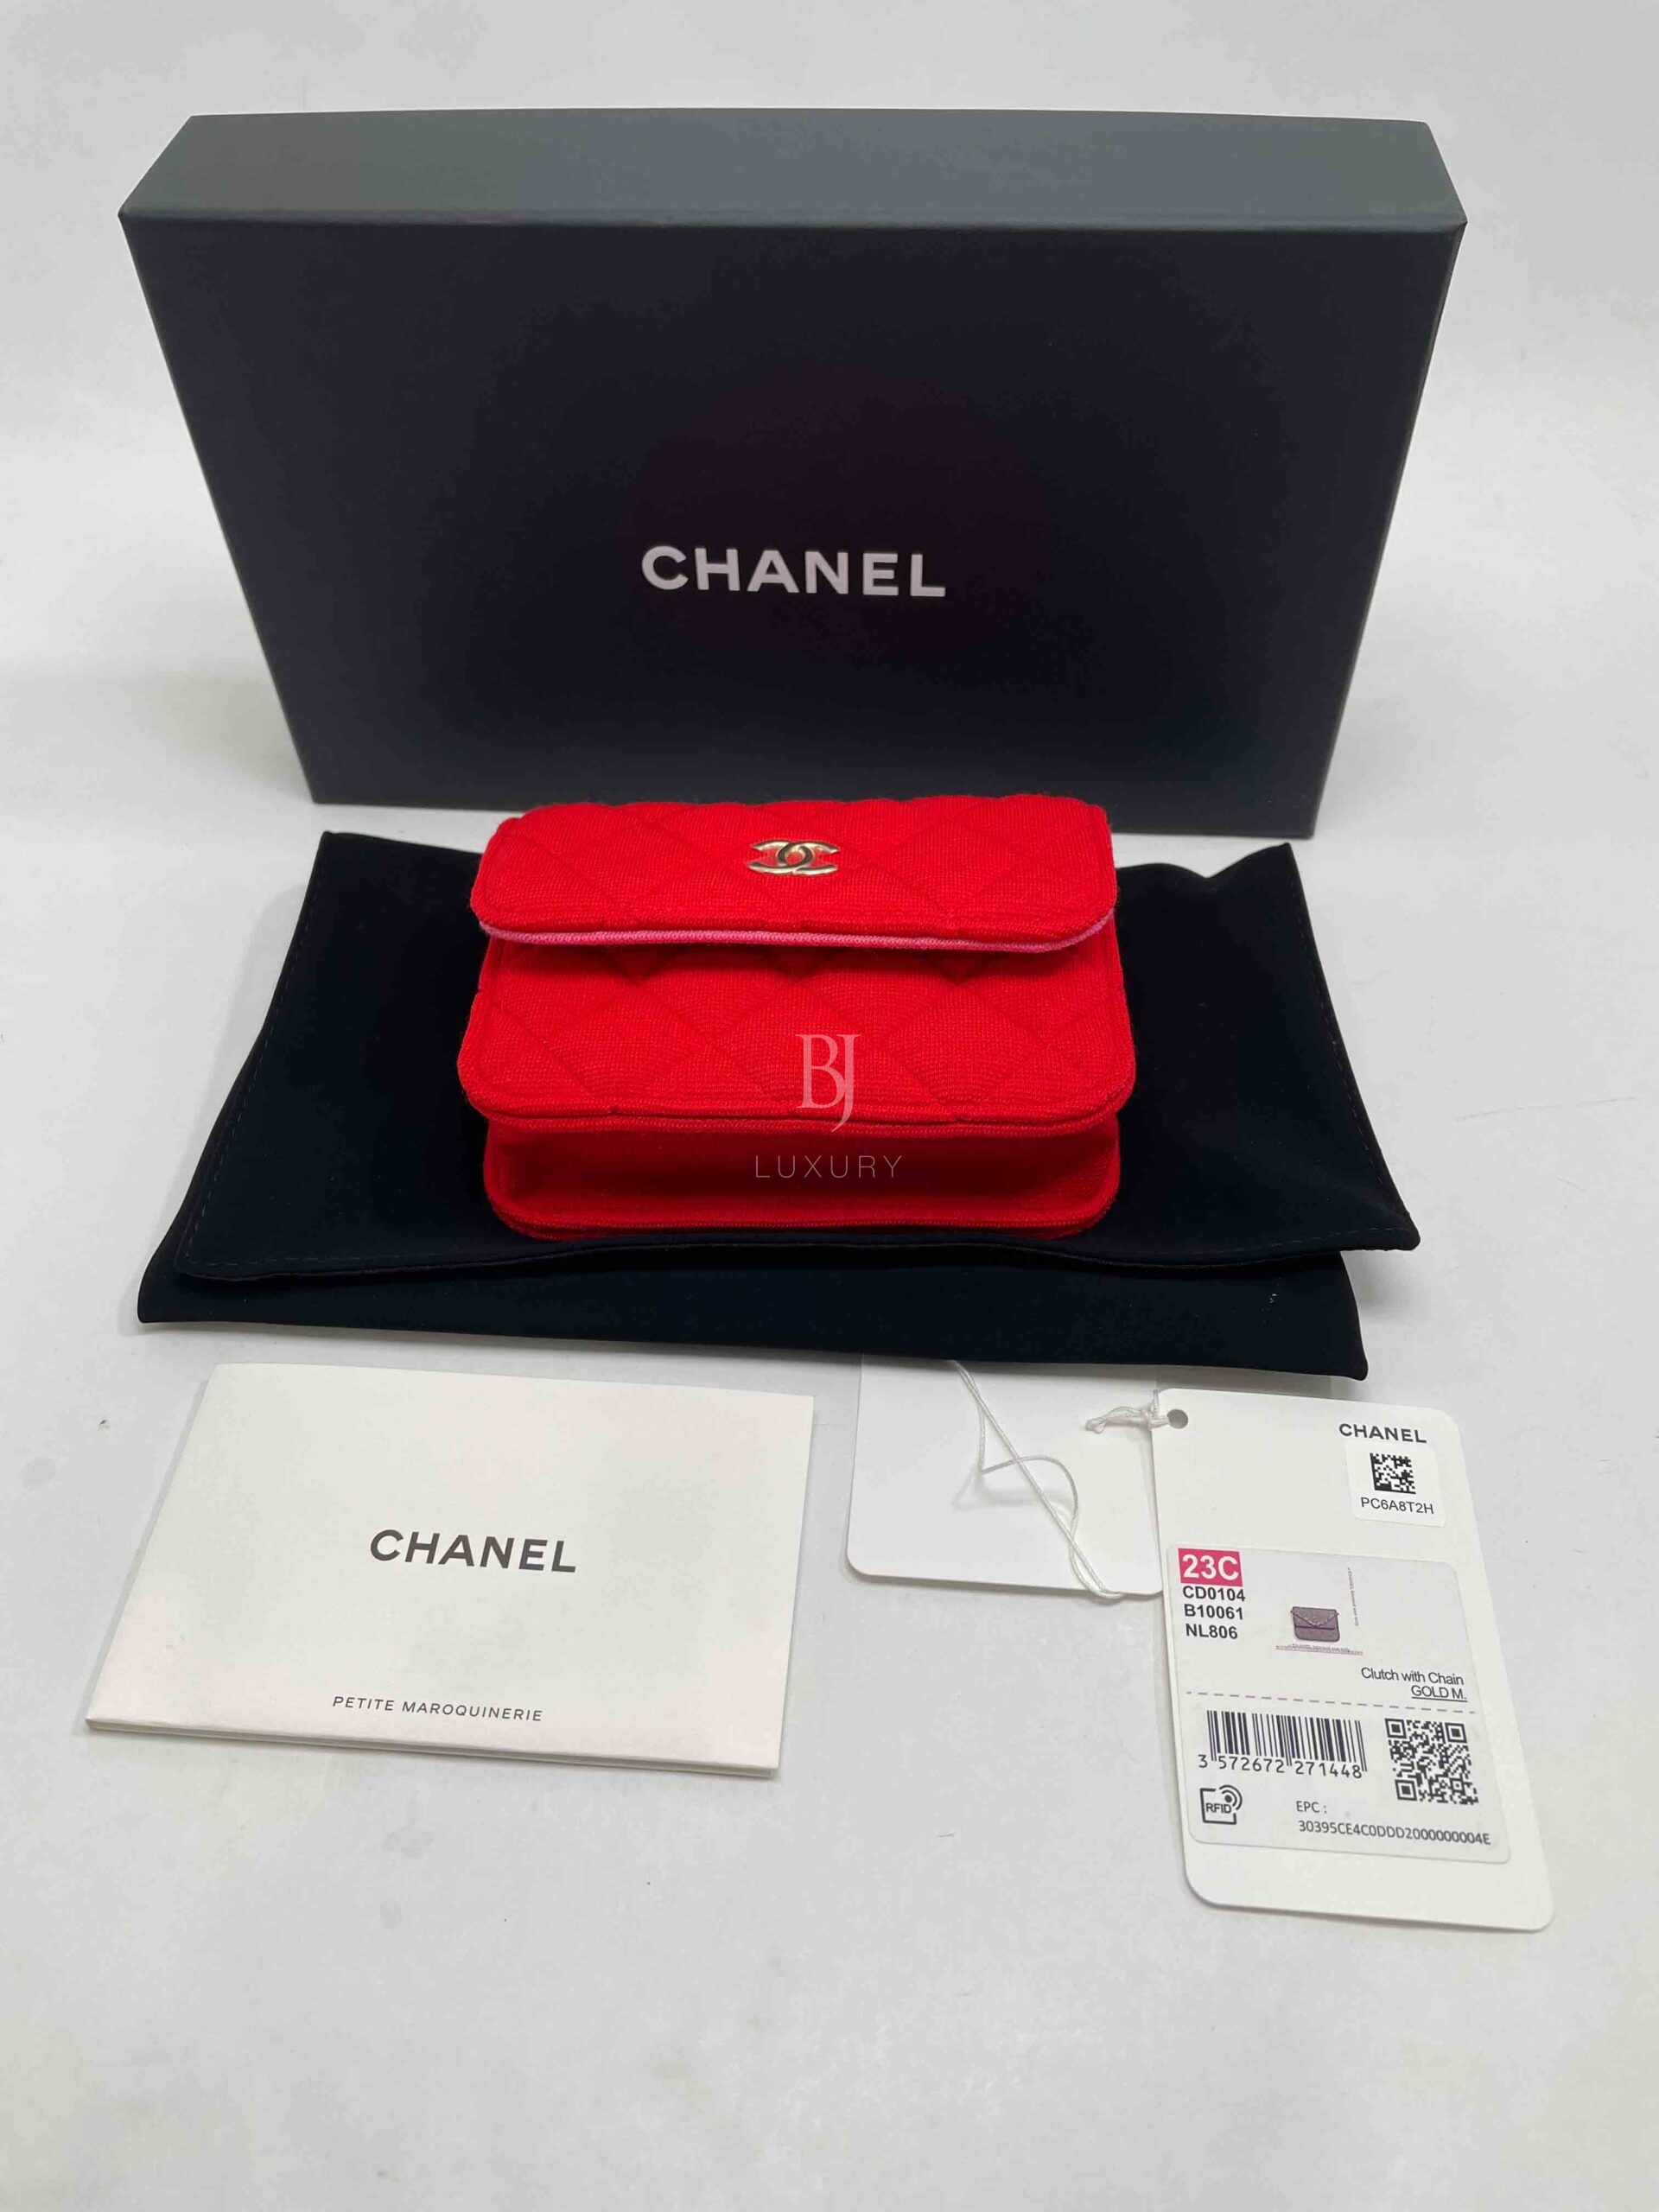 CHANEL-CLUTCHWITHCHAIN-MICROMINI-RED-JERSEY-Photo 14-2-23, 18 39 03.jpg